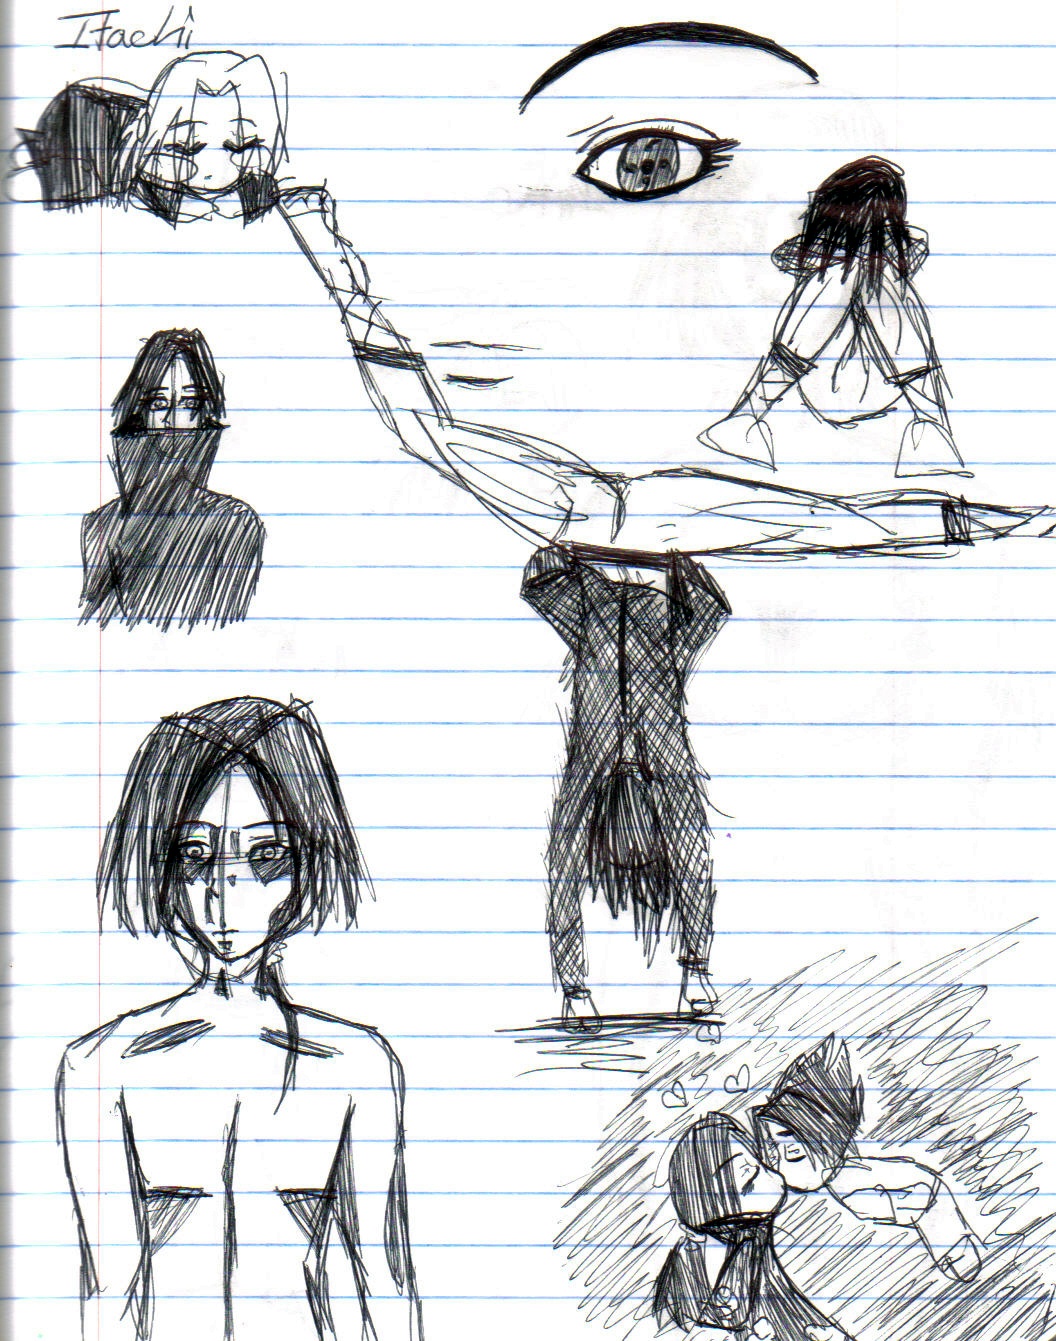 Itachi doodles by yrstruley